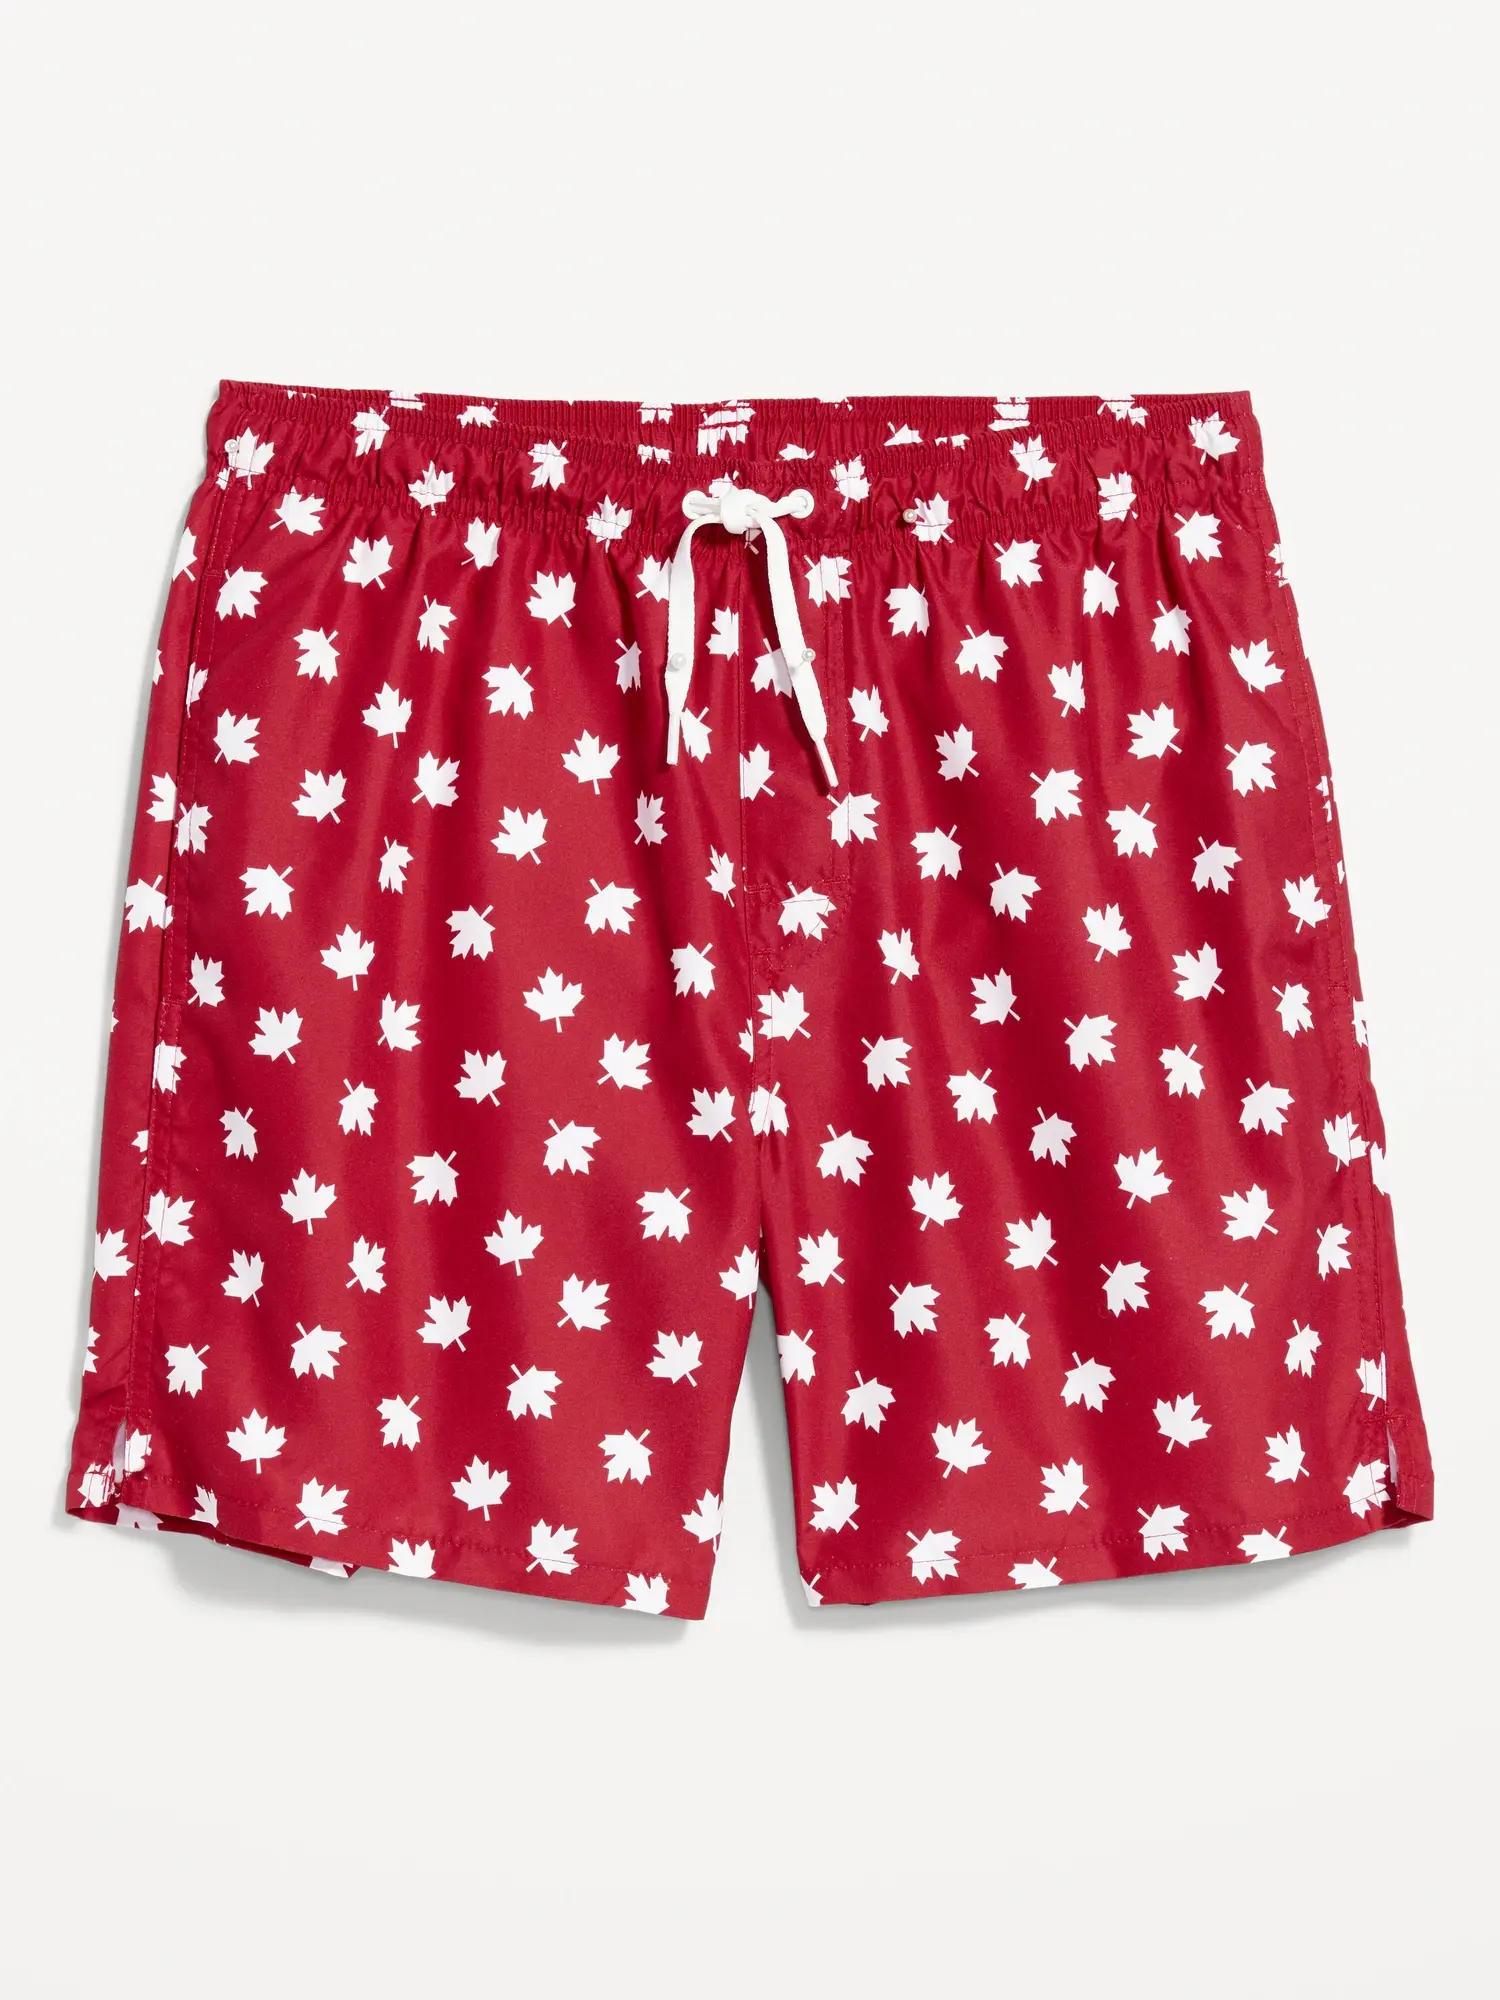 Old Navy Printed Swim Trunks for Men --7-inch inseam red. 1